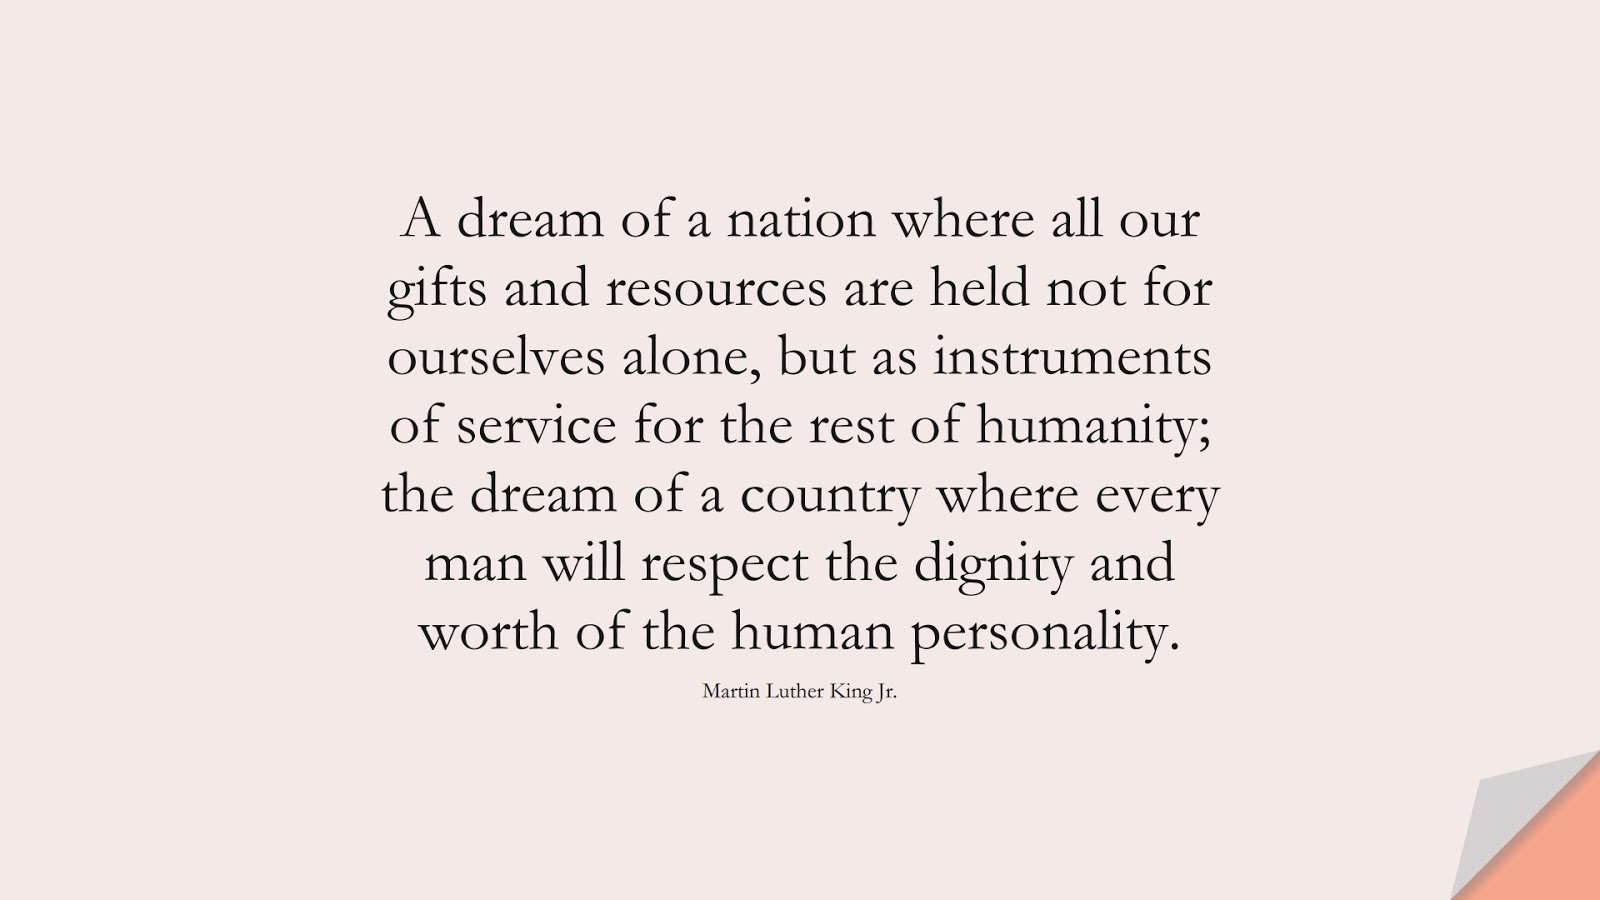 A dream of a nation where all our gifts and resources are held not for ourselves alone, but as instruments of service for the rest of humanity; the dream of a country where every man will respect the dignity and worth of the human personality. (Martin Luther King Jr.);  #MartinLutherKingJrQuotes